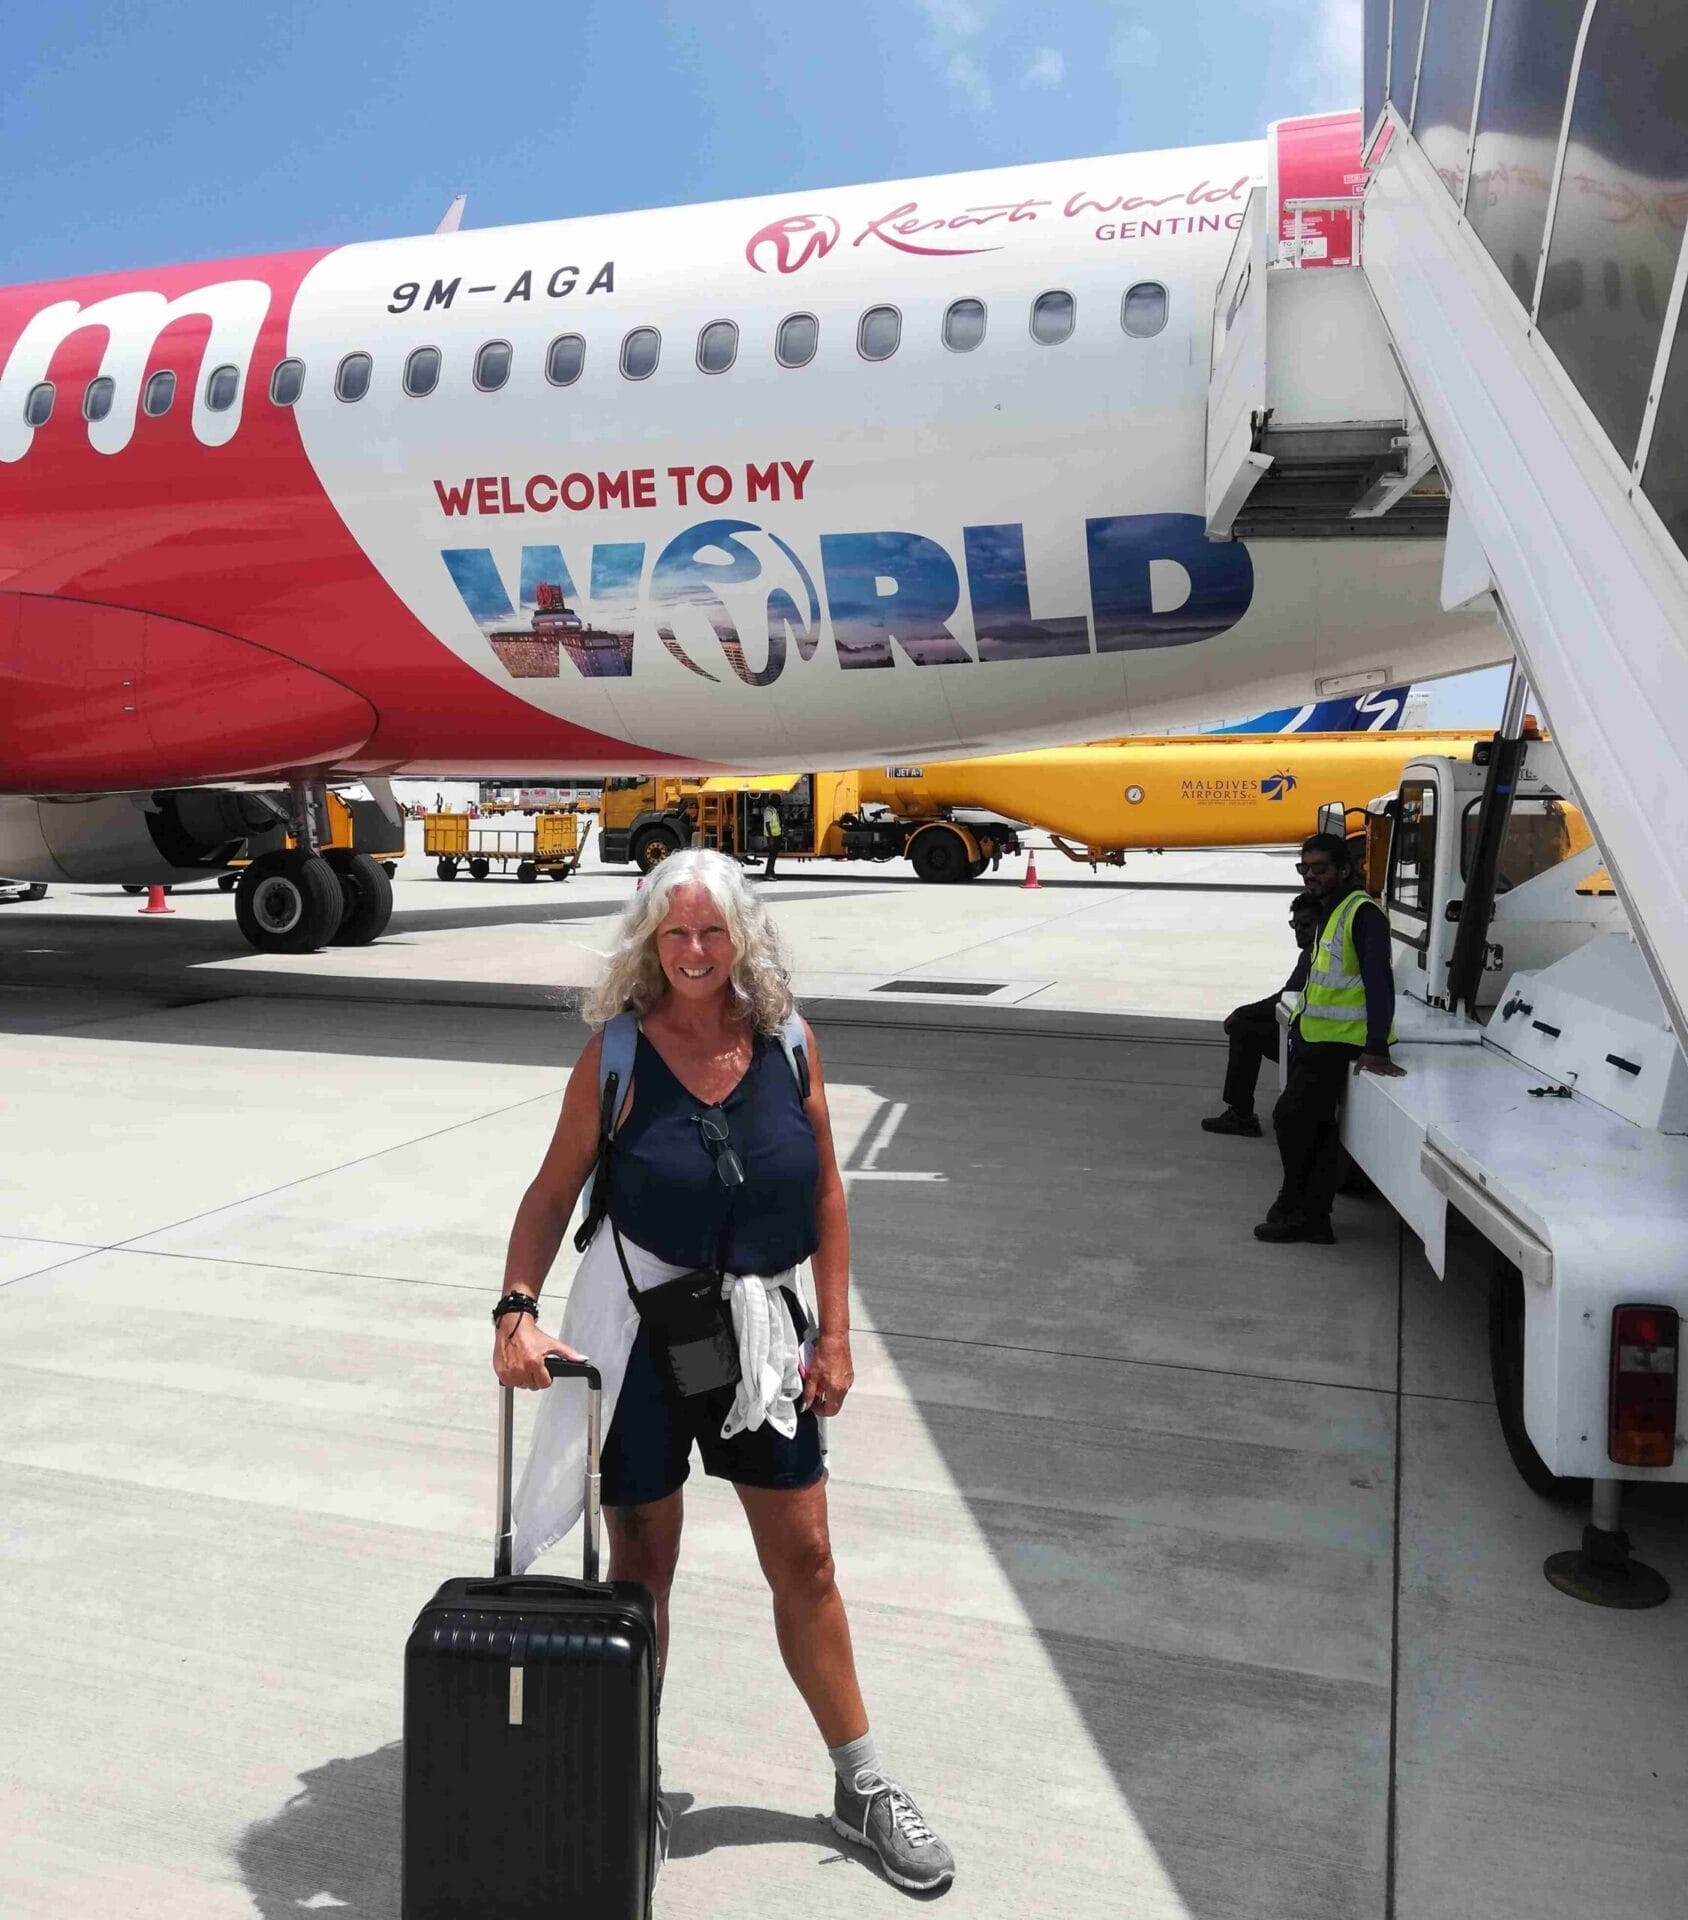 THE BACKPACKING HOUSEWIFE TRAVEL THE WORLD